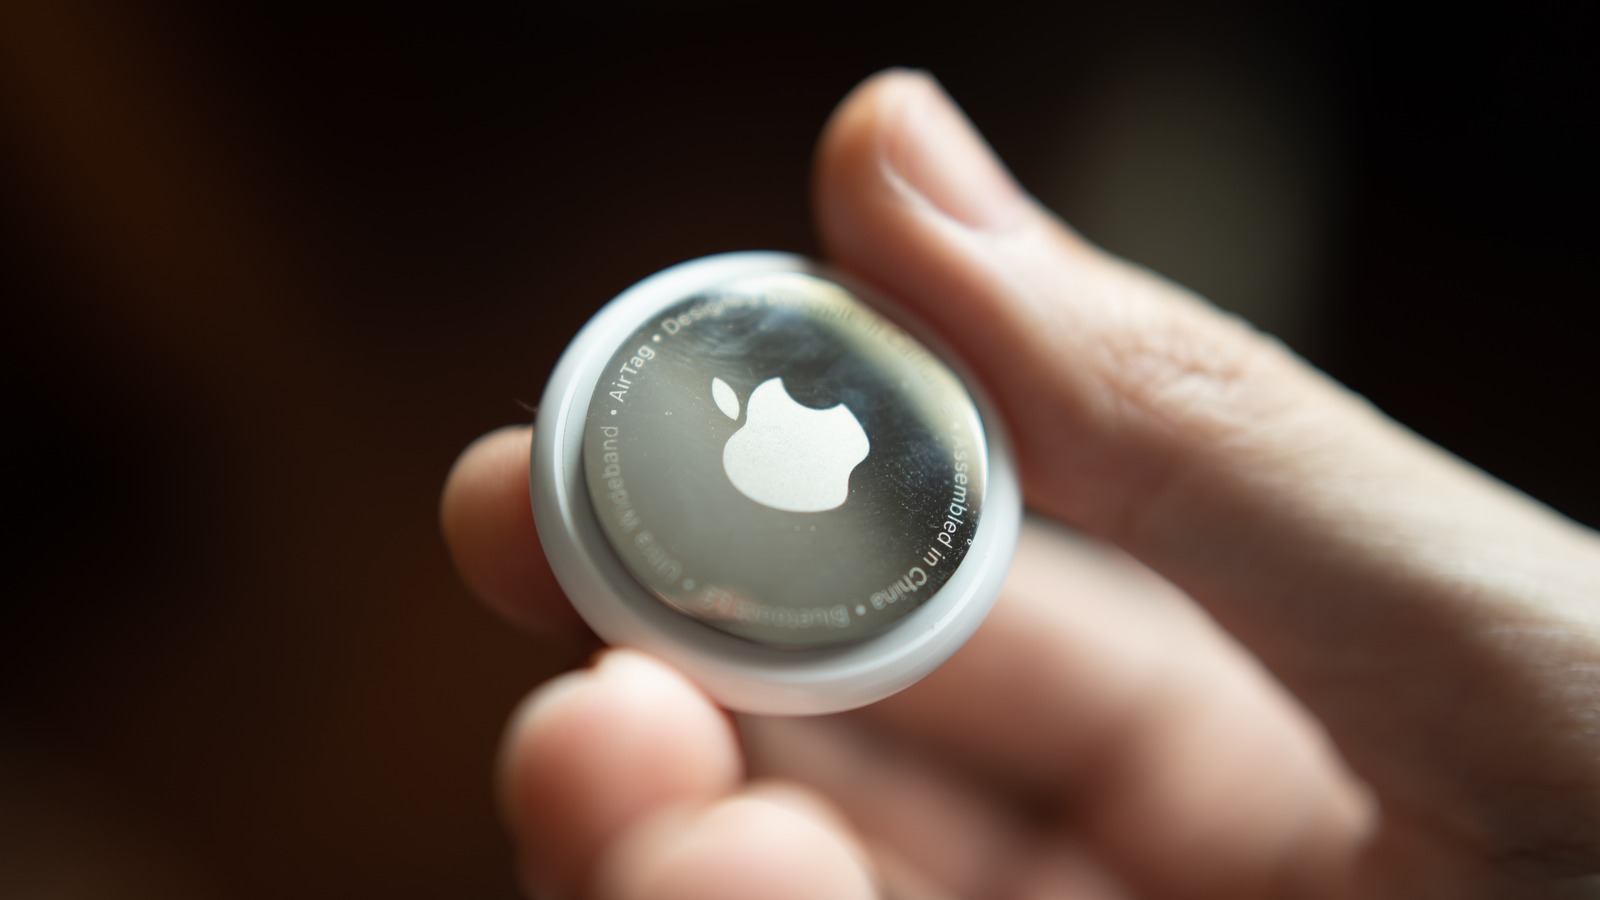 Pros and cons of tracking your lost items using Apple AirTag